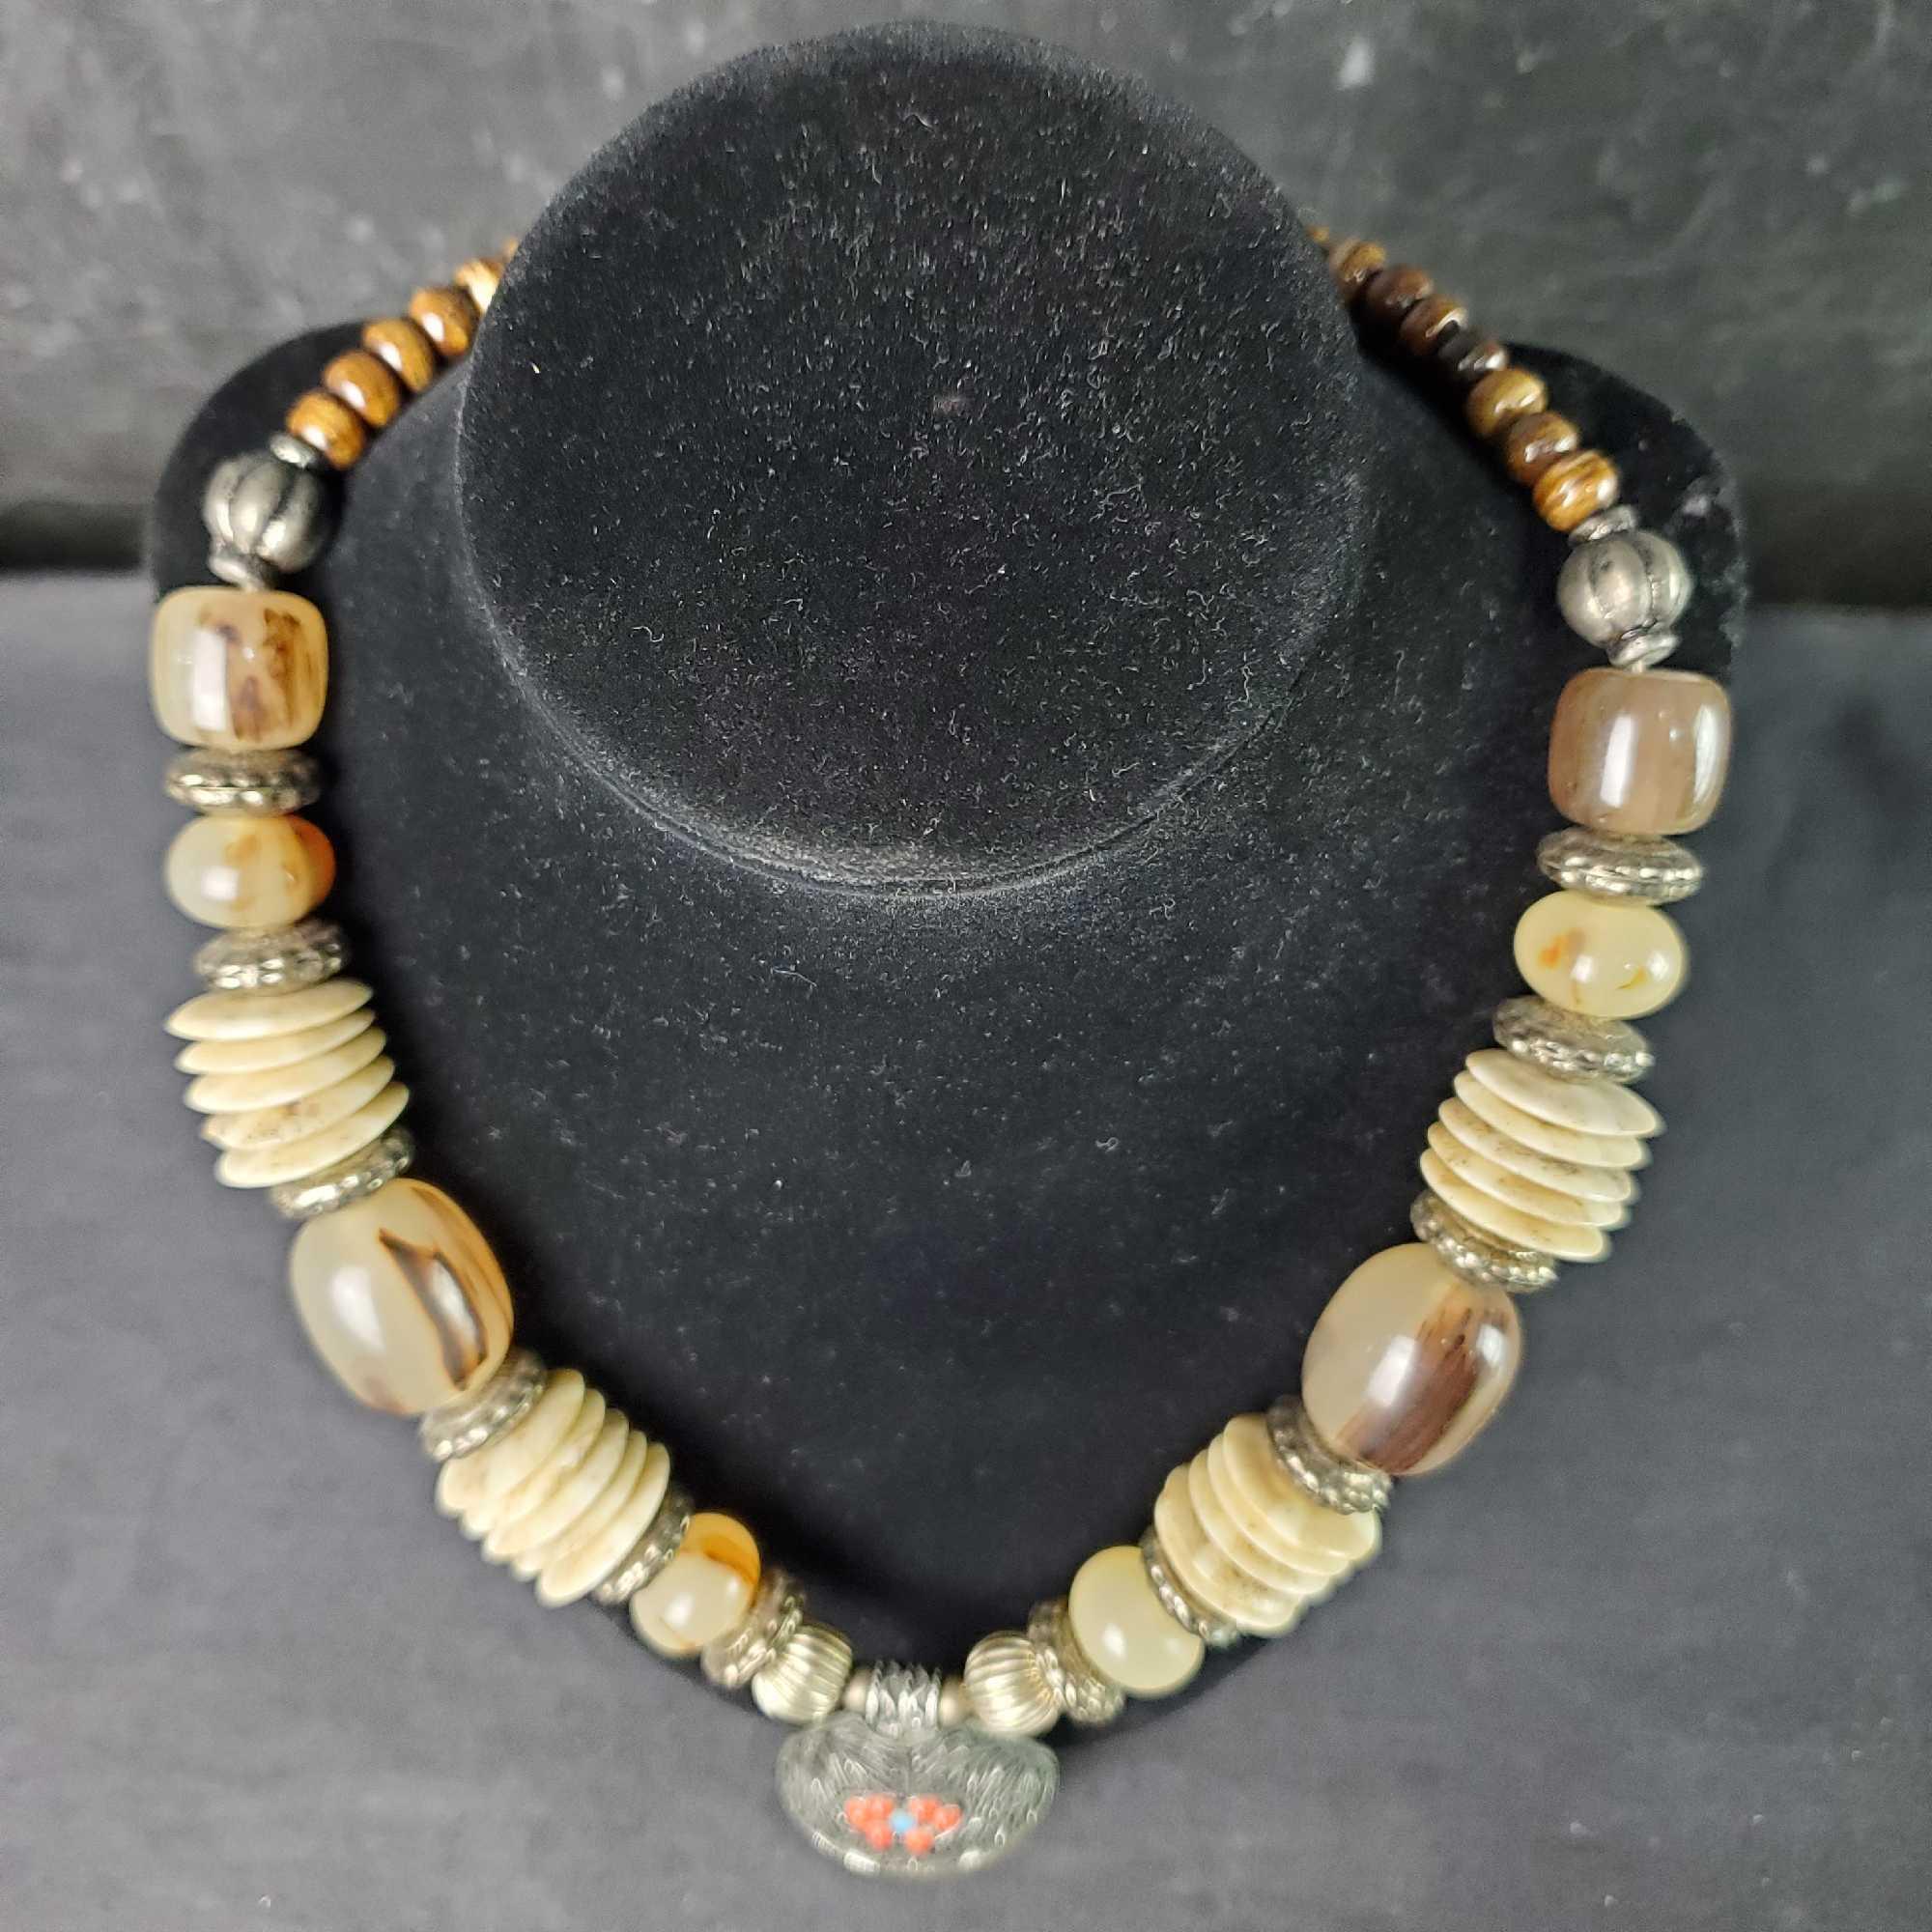 Unique beaded and shell disc necklace with large stone like pendant